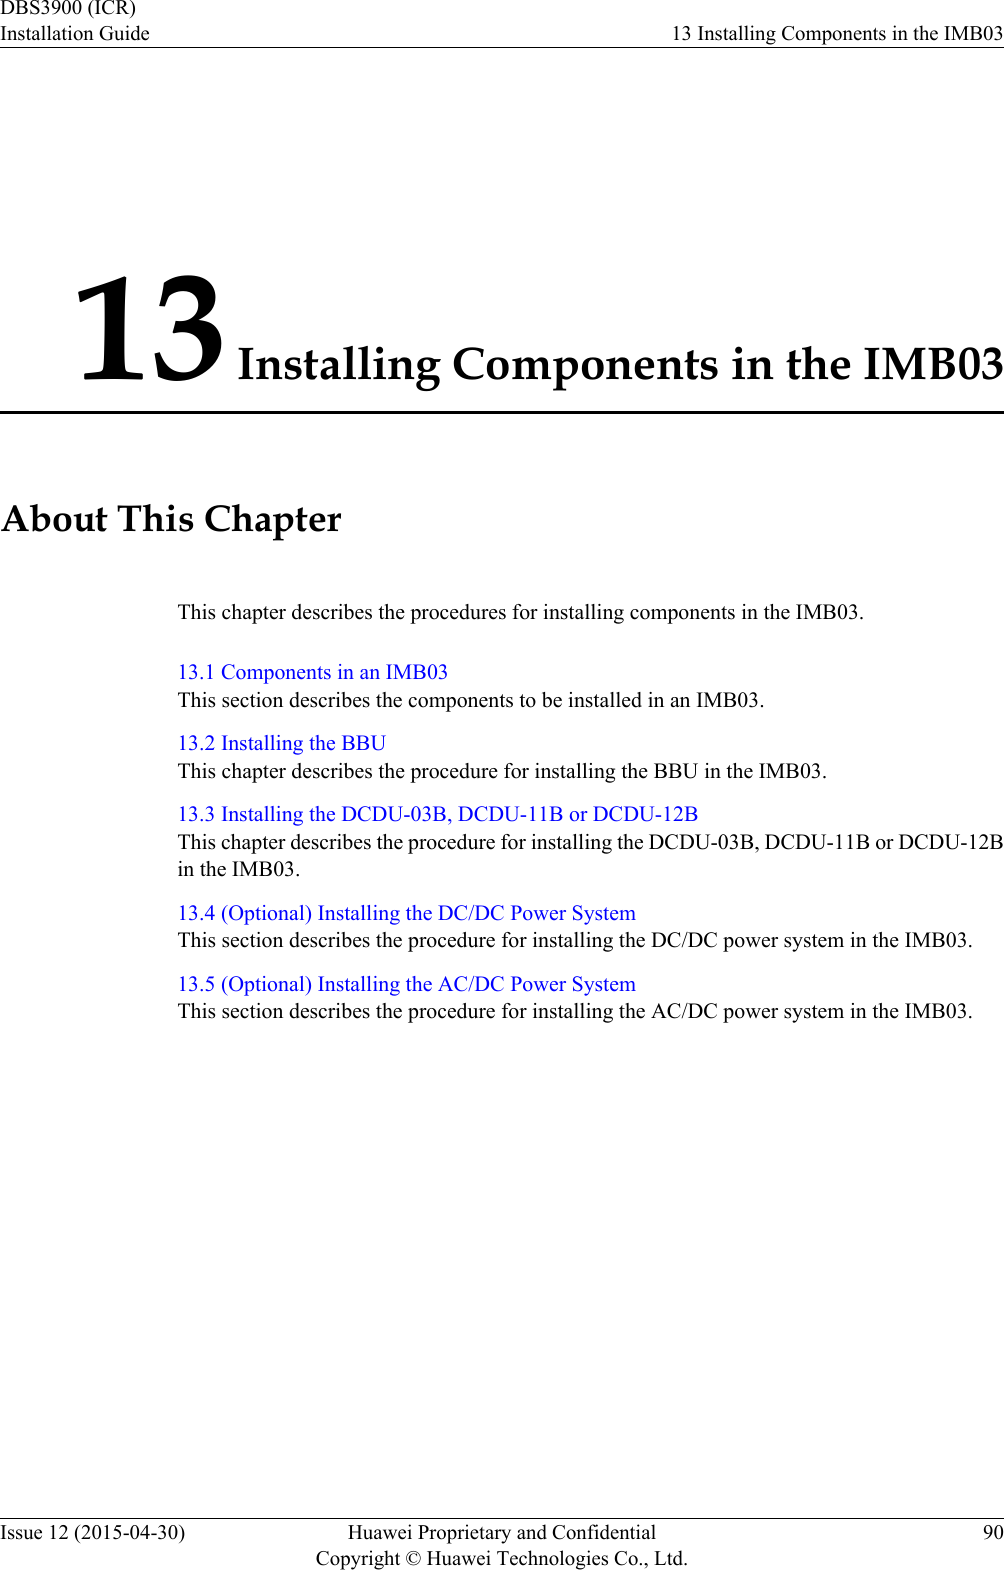 13 Installing Components in the IMB03About This ChapterThis chapter describes the procedures for installing components in the IMB03.13.1 Components in an IMB03This section describes the components to be installed in an IMB03.13.2 Installing the BBUThis chapter describes the procedure for installing the BBU in the IMB03.13.3 Installing the DCDU-03B, DCDU-11B or DCDU-12BThis chapter describes the procedure for installing the DCDU-03B, DCDU-11B or DCDU-12Bin the IMB03.13.4 (Optional) Installing the DC/DC Power SystemThis section describes the procedure for installing the DC/DC power system in the IMB03.13.5 (Optional) Installing the AC/DC Power SystemThis section describes the procedure for installing the AC/DC power system in the IMB03.DBS3900 (ICR)Installation Guide 13 Installing Components in the IMB03Issue 12 (2015-04-30) Huawei Proprietary and ConfidentialCopyright © Huawei Technologies Co., Ltd.90